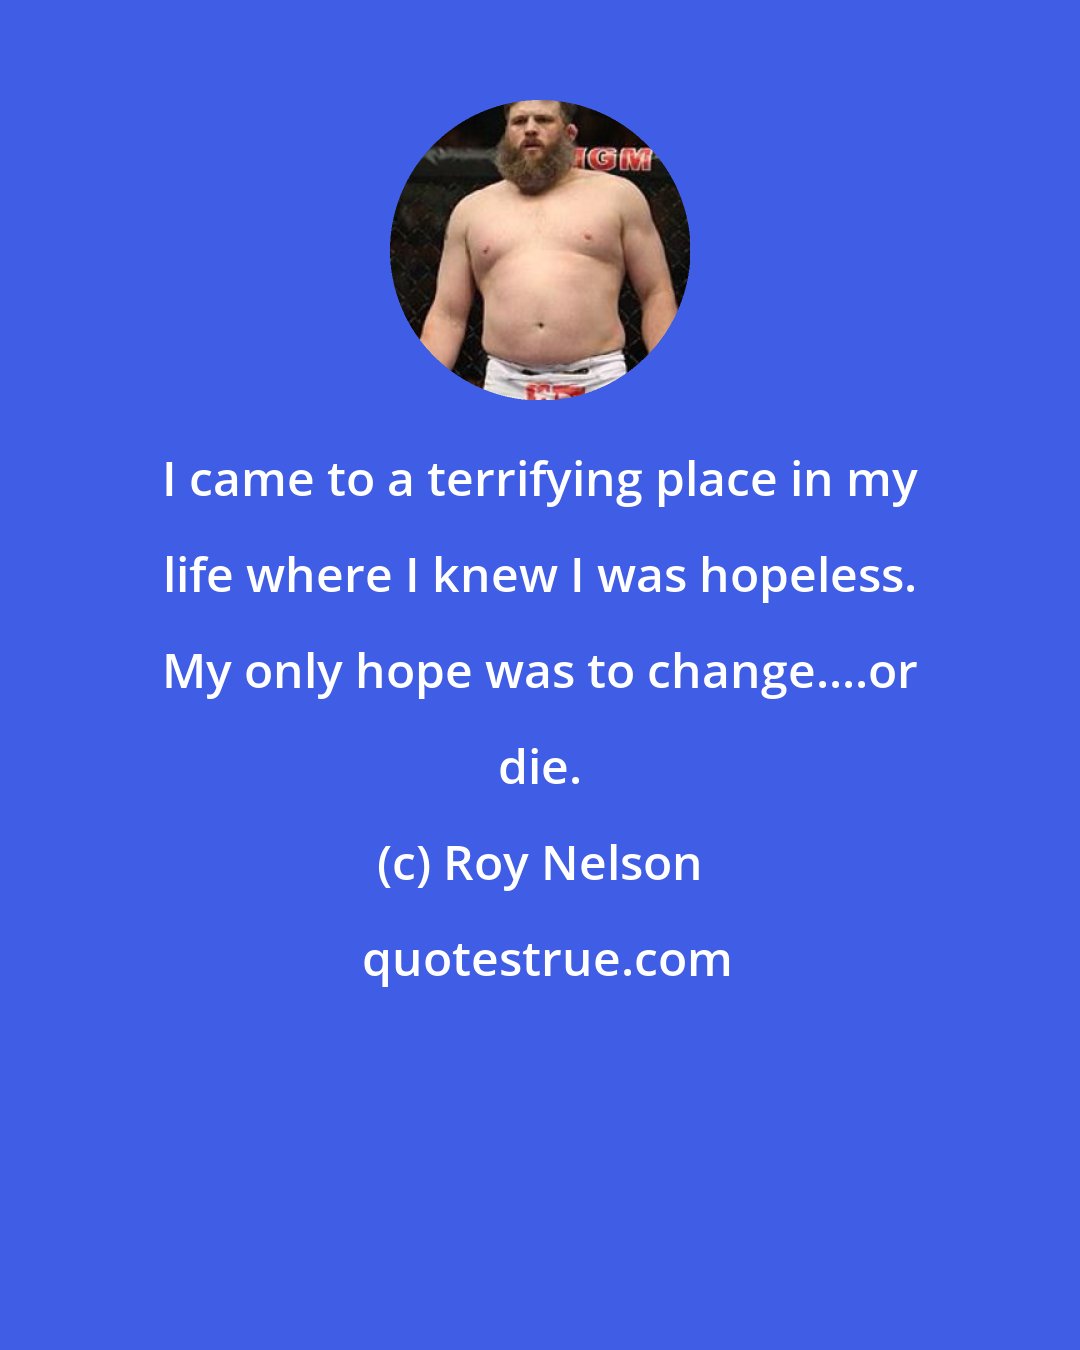 Roy Nelson: I came to a terrifying place in my life where I knew I was hopeless. My only hope was to change....or die.